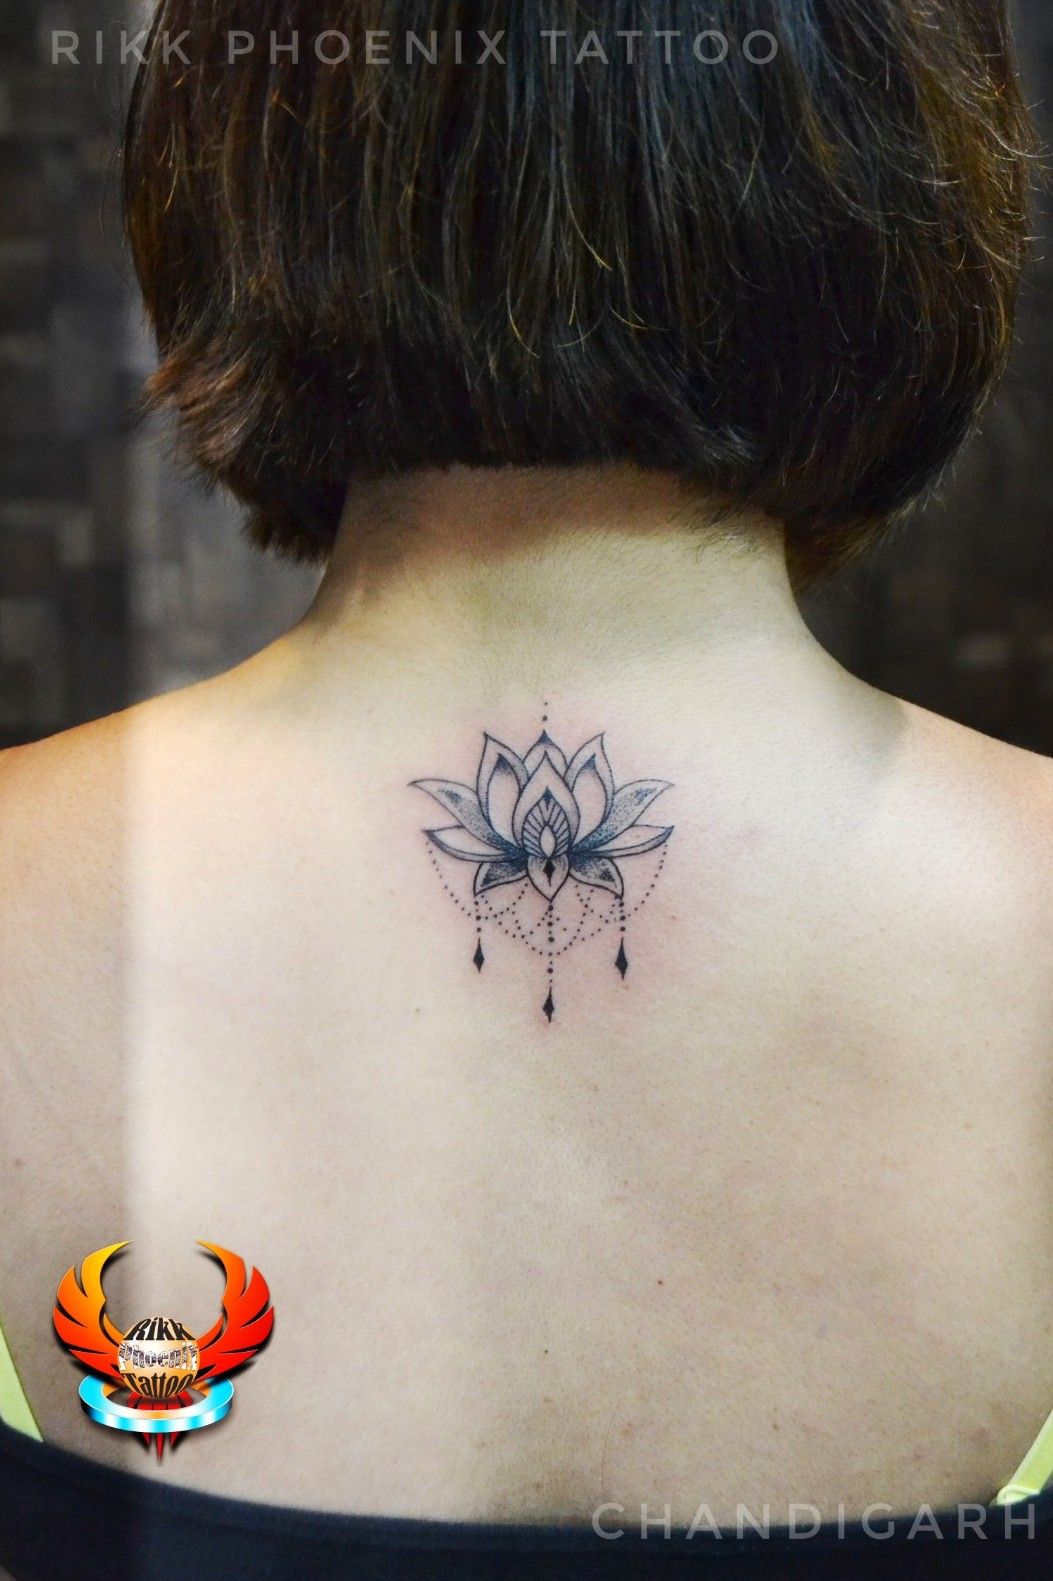 Top 10 Spine Tattoos The Best Ideas For Spine Tattoos  MrInkwells